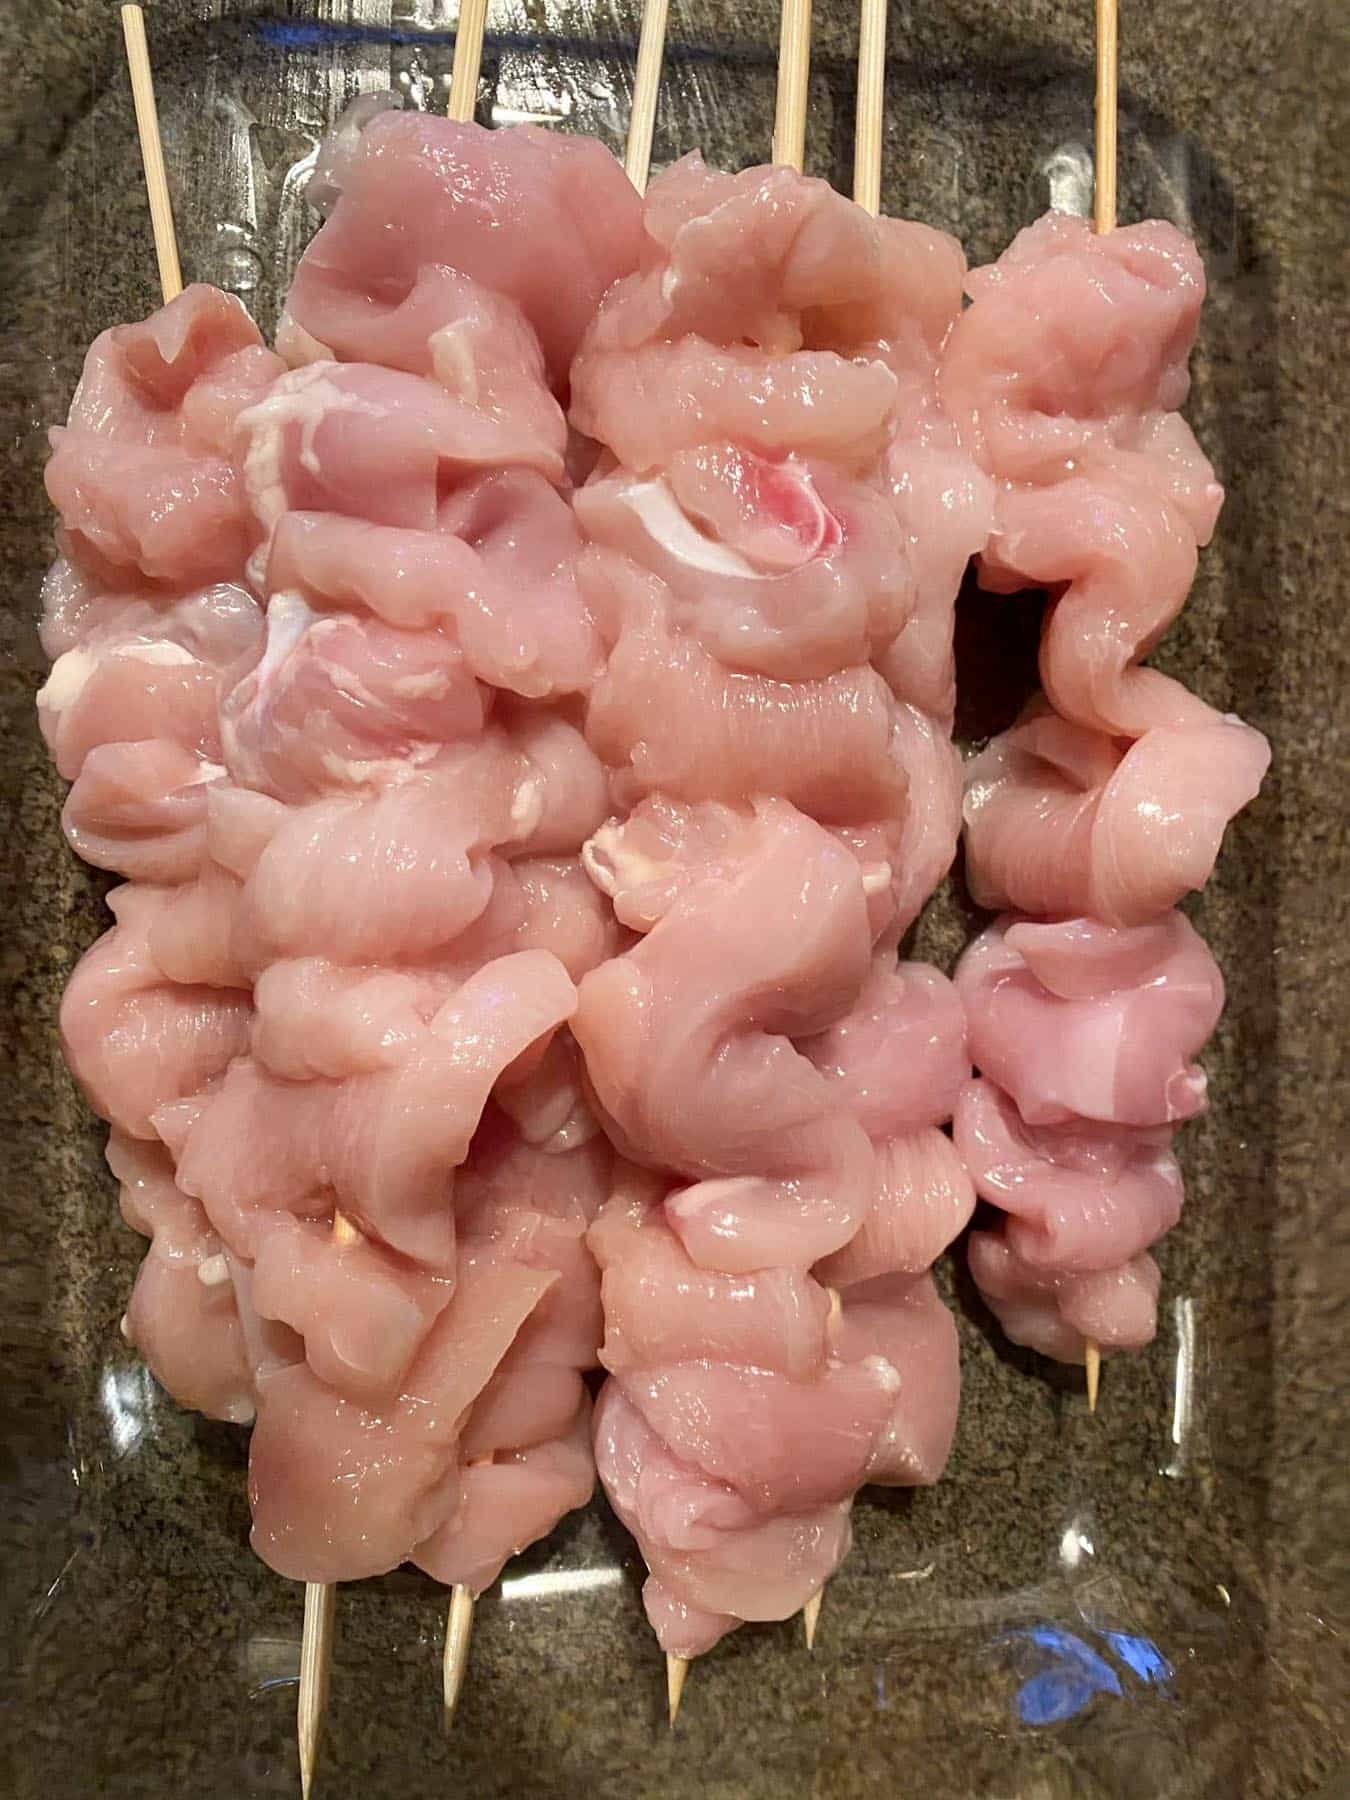 all chicken pieces on skewer in a container